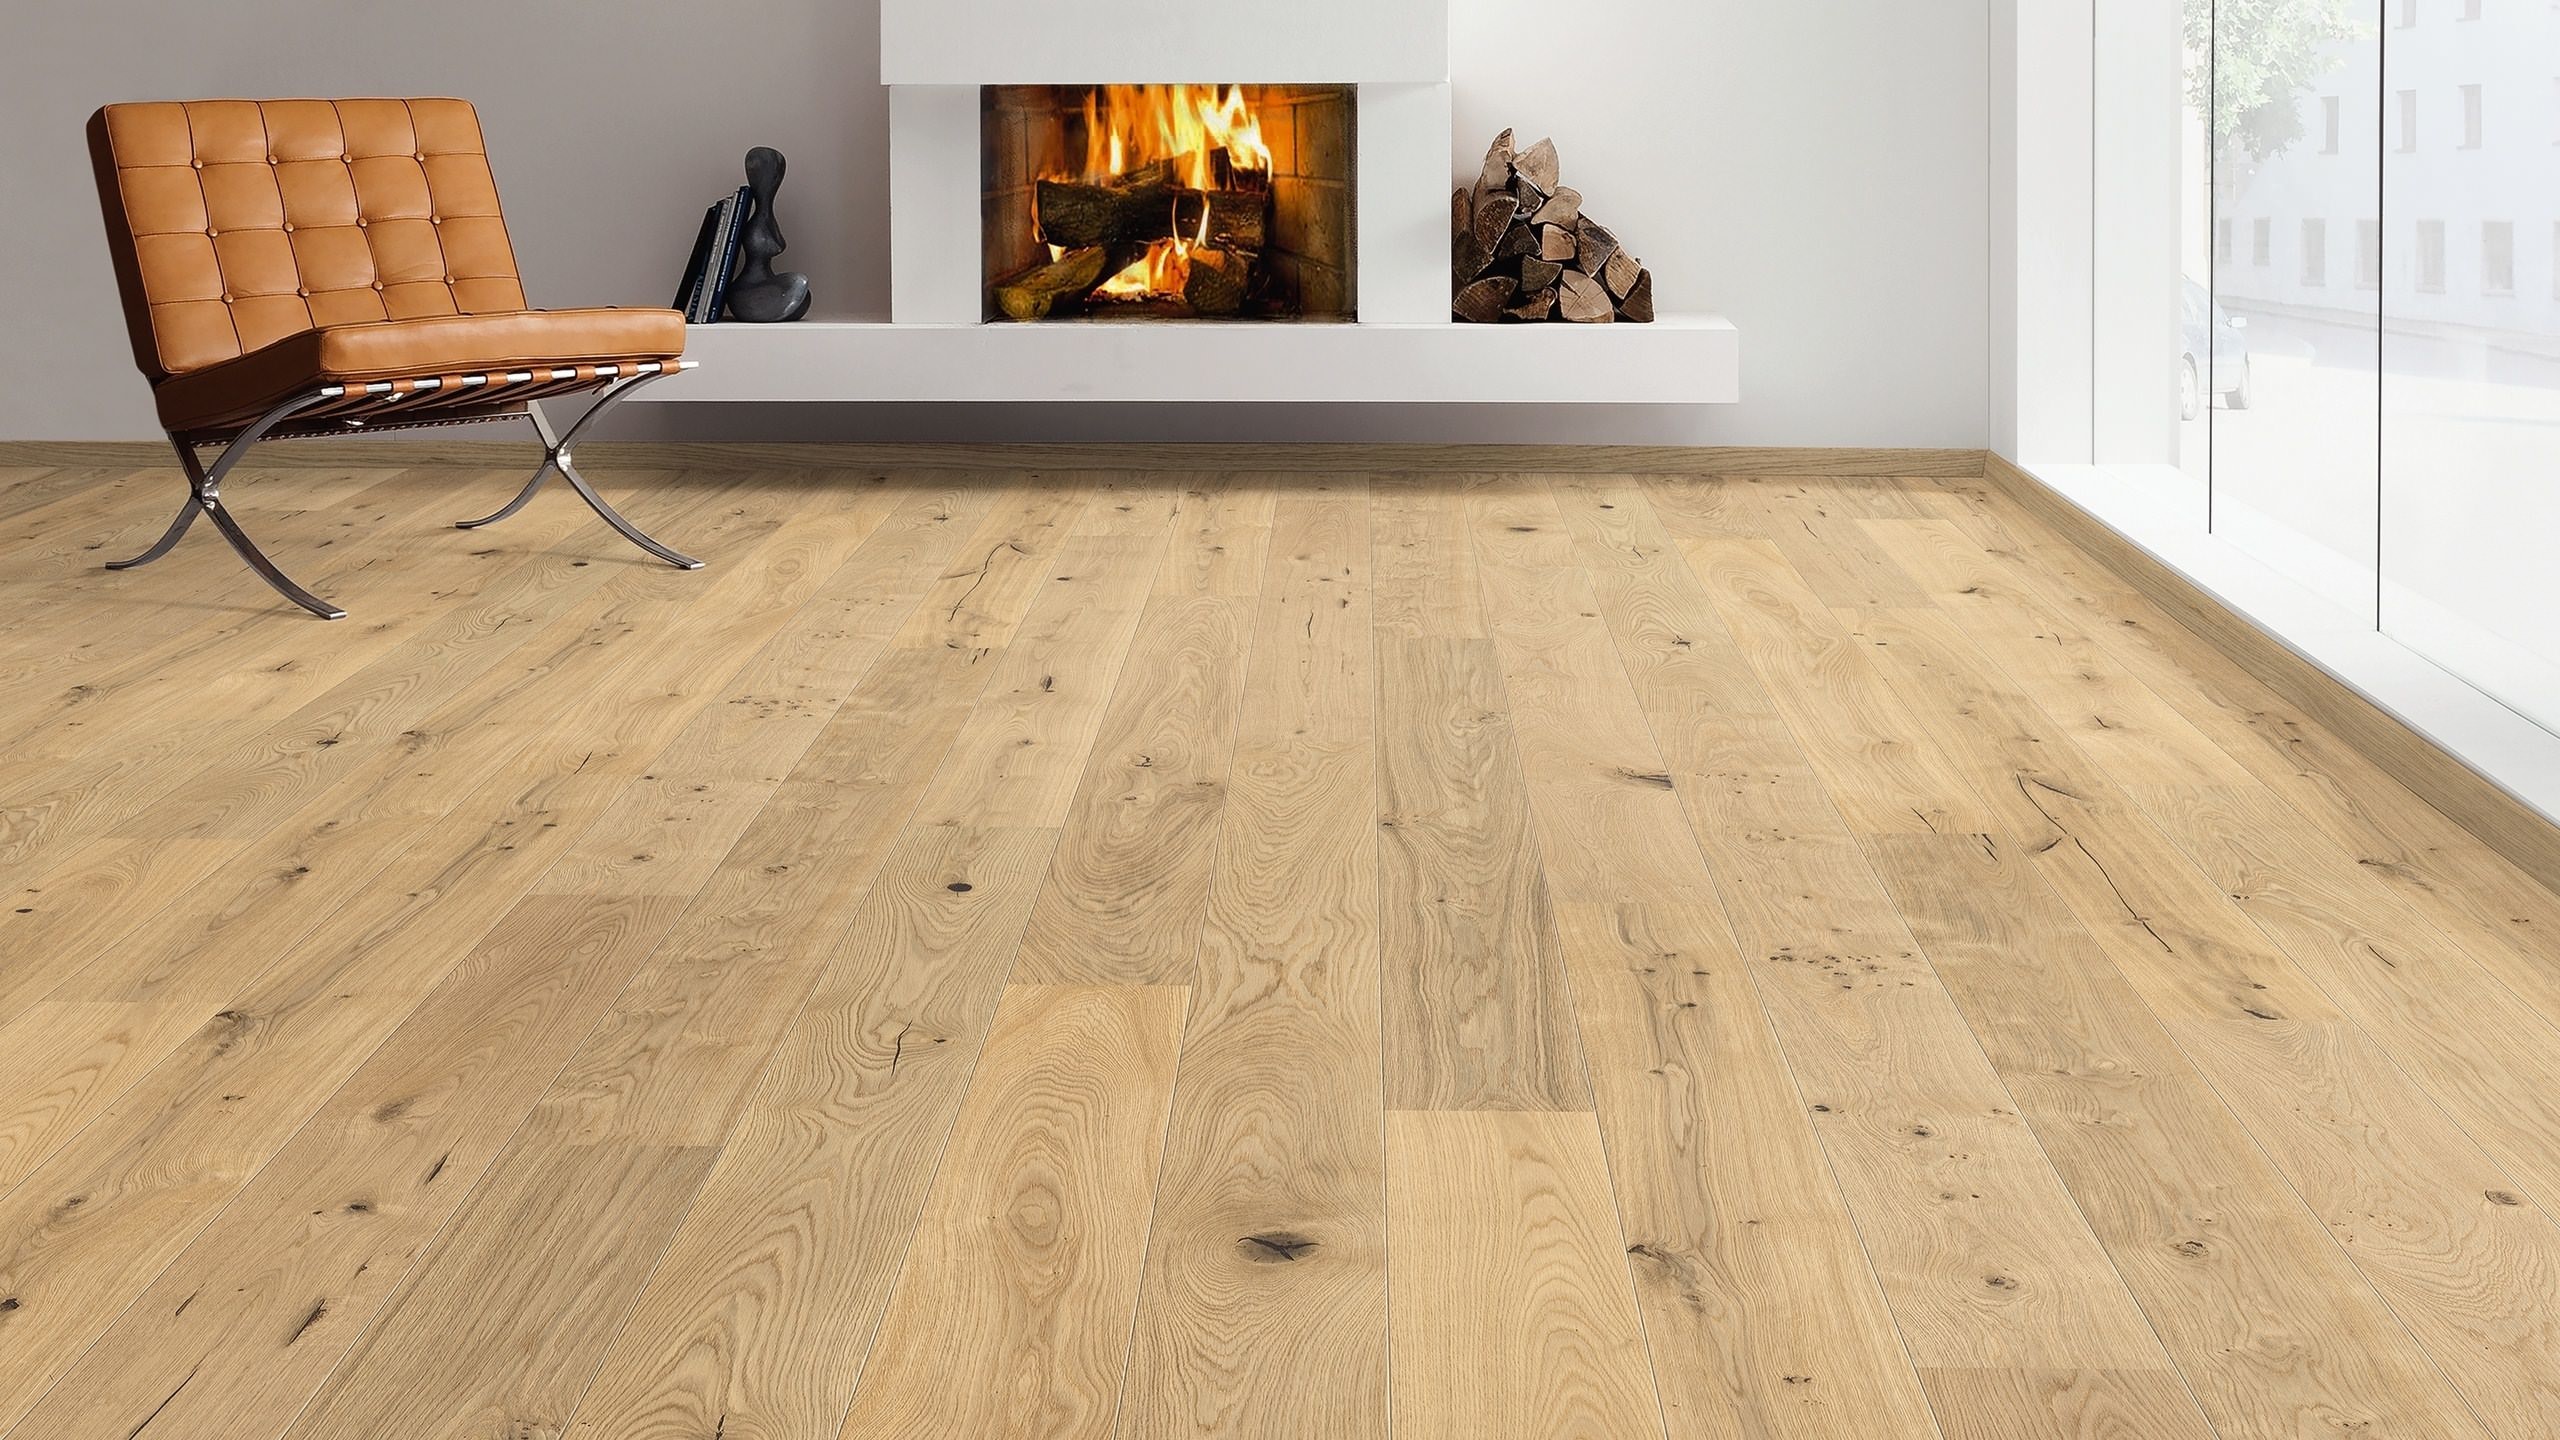 HARO PARQUET 4000 Plank 1-Strip 180 2V Oak Invisible Sauvage brushed permaDur Top Connect